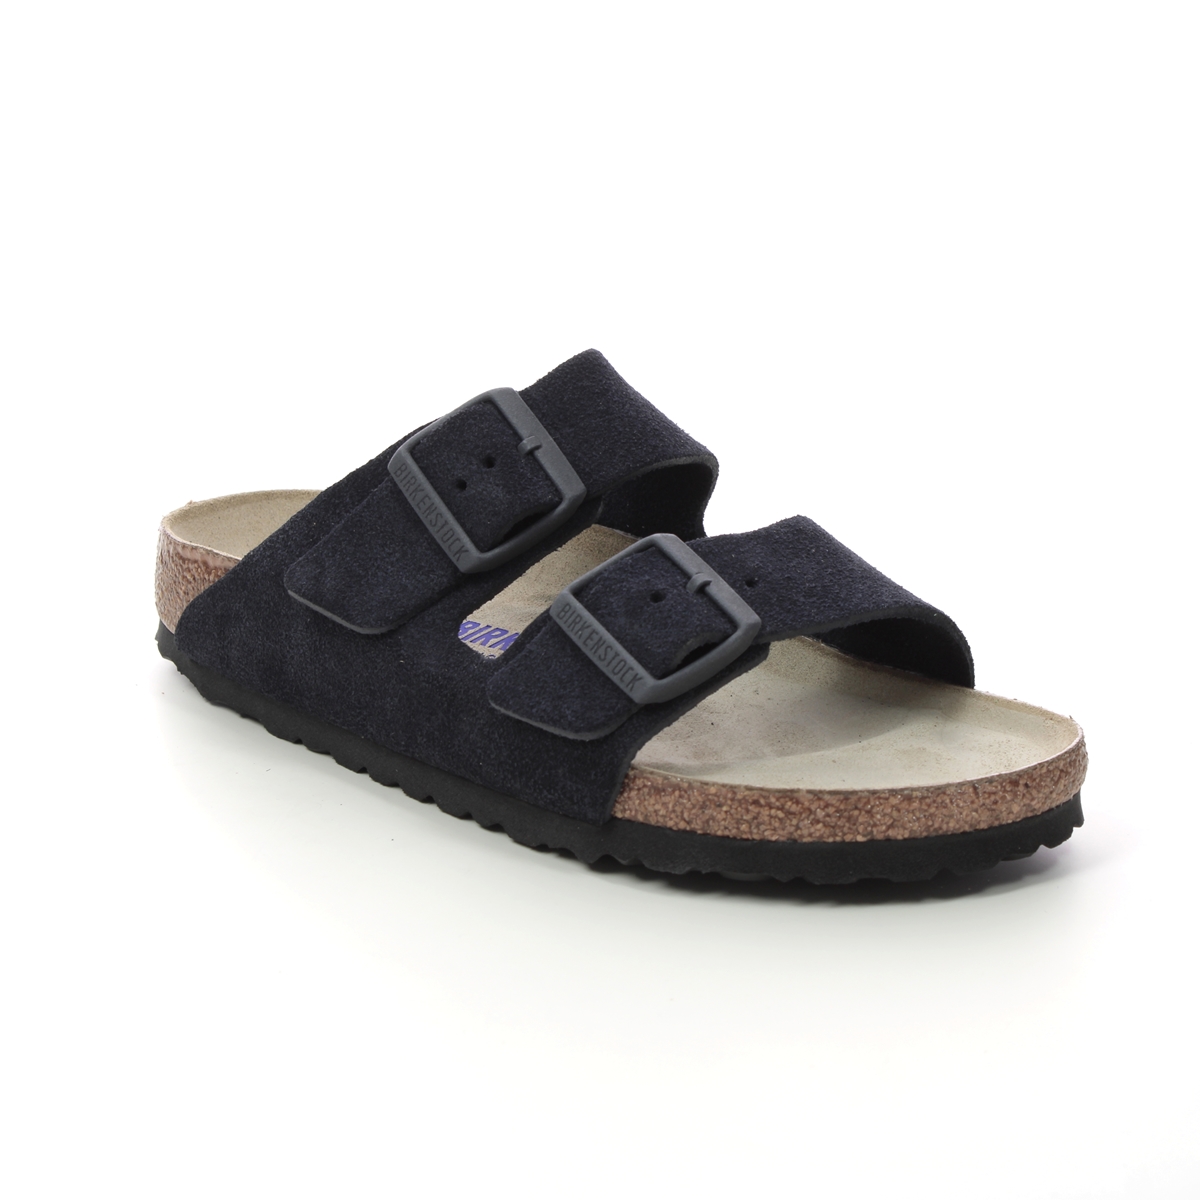 Birkenstock Arizona Soft Footbed Navy suede Womens Slide Sandals 1020716 in a Plain Leather in Size 38